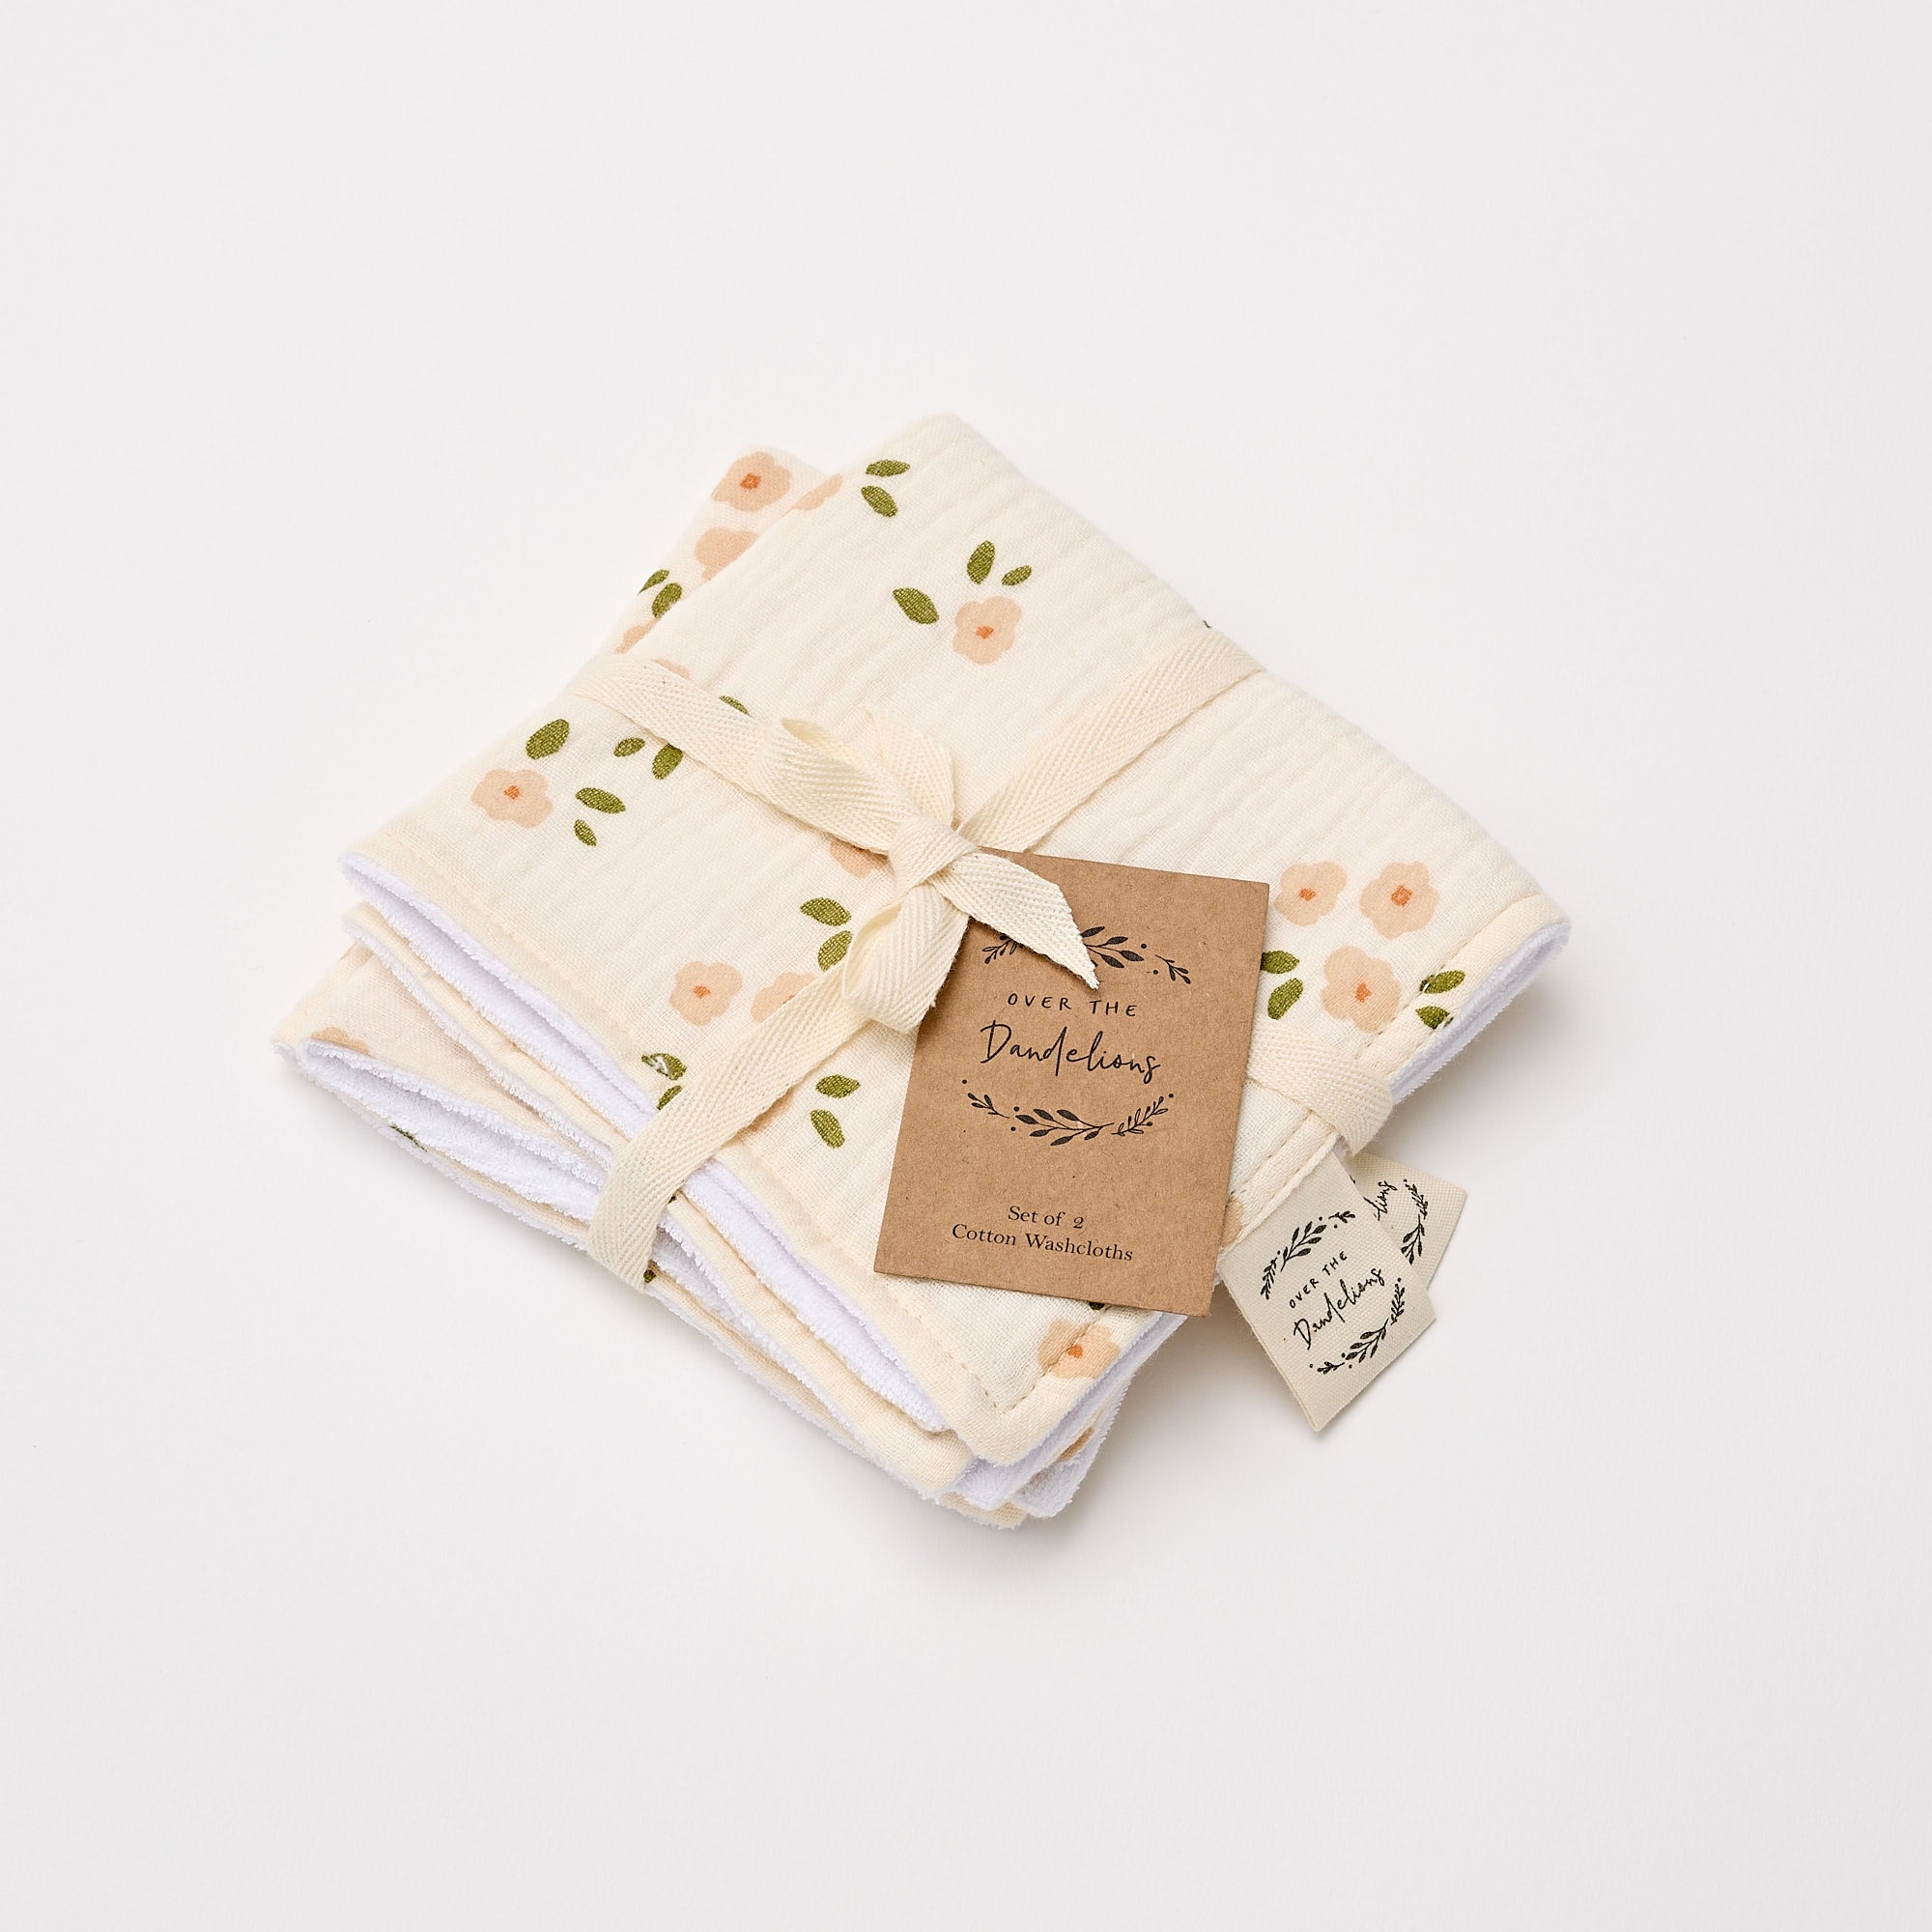 Over the Dandelions Washcloth S2 Daisy